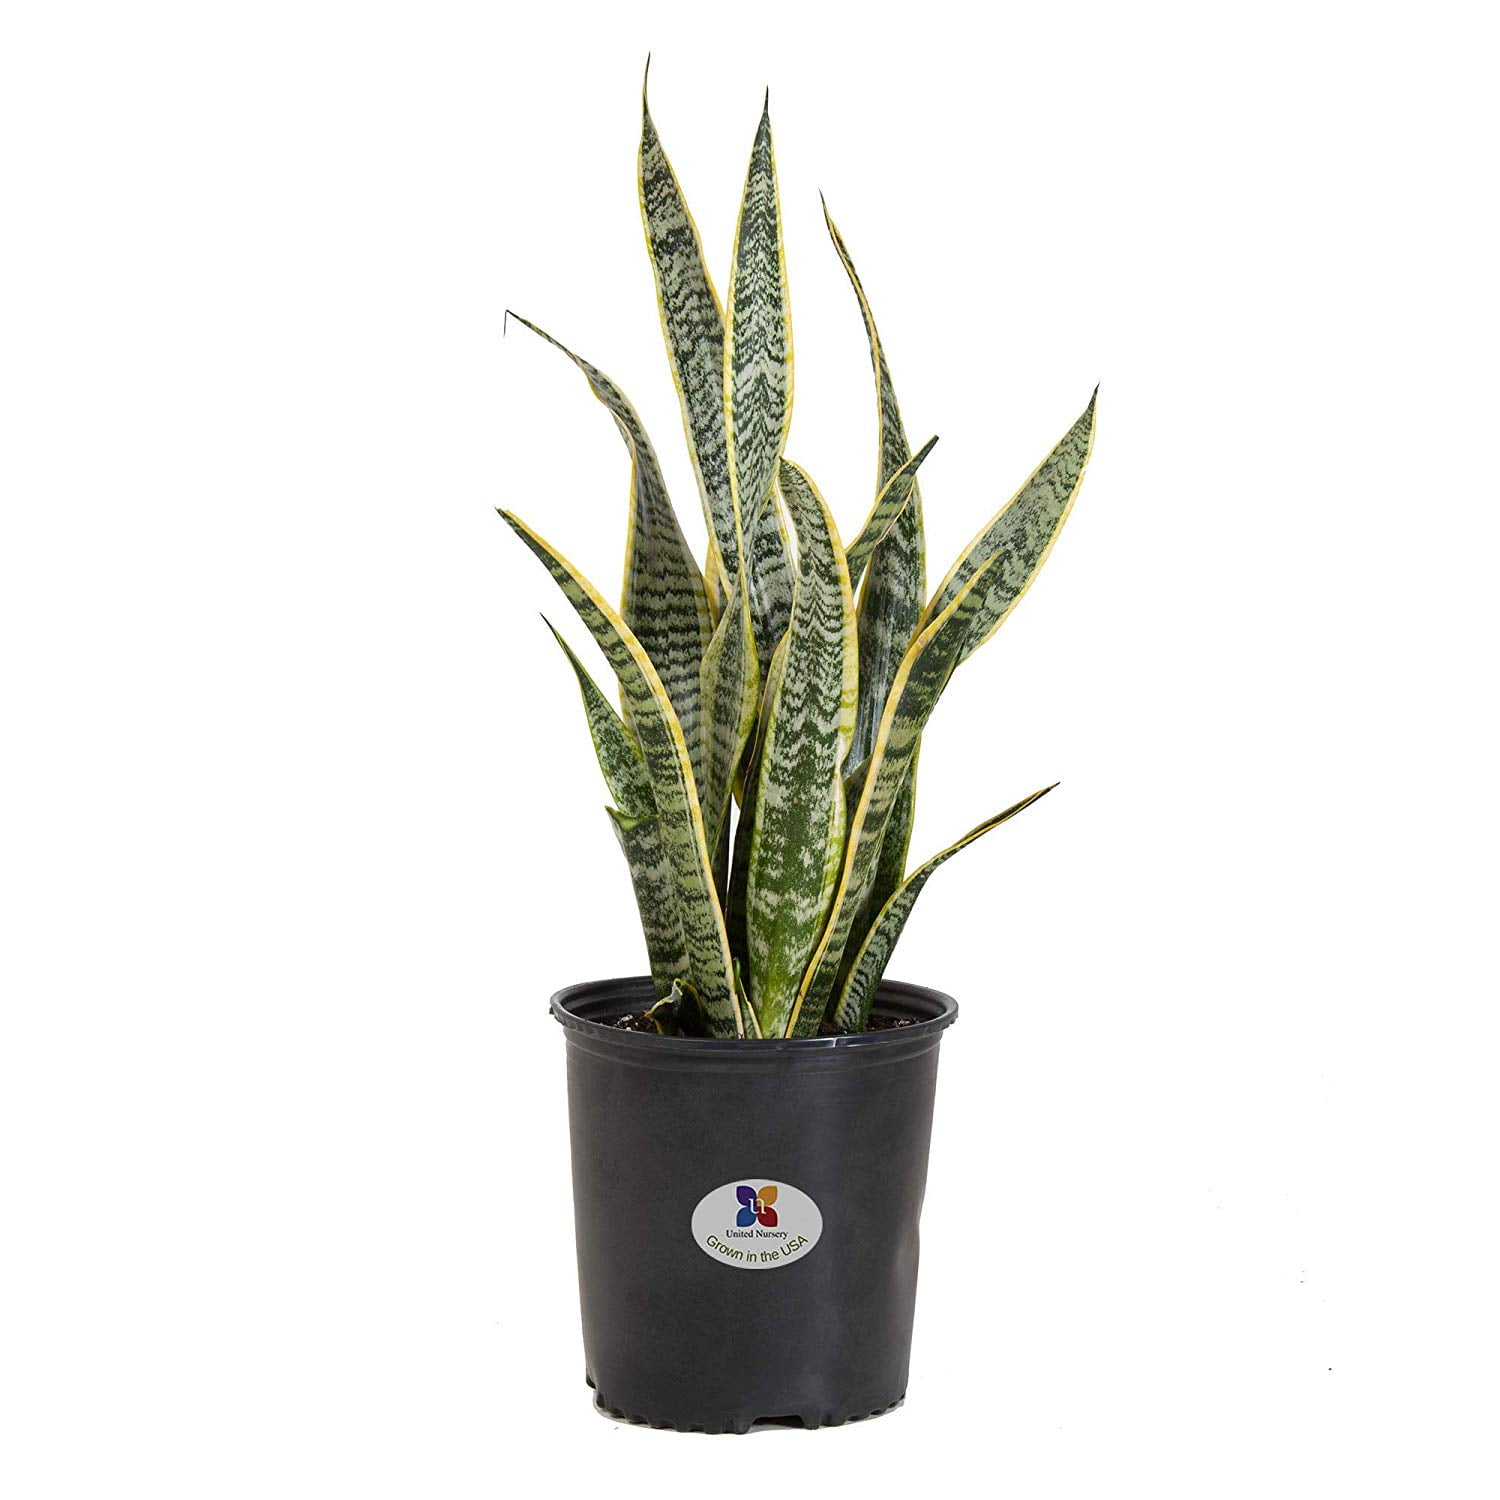 This a  wysiwyg plant collection. An Eco Pot Collection  with Sansevieria  laurentii a ZZ plant  and a Parlor palm